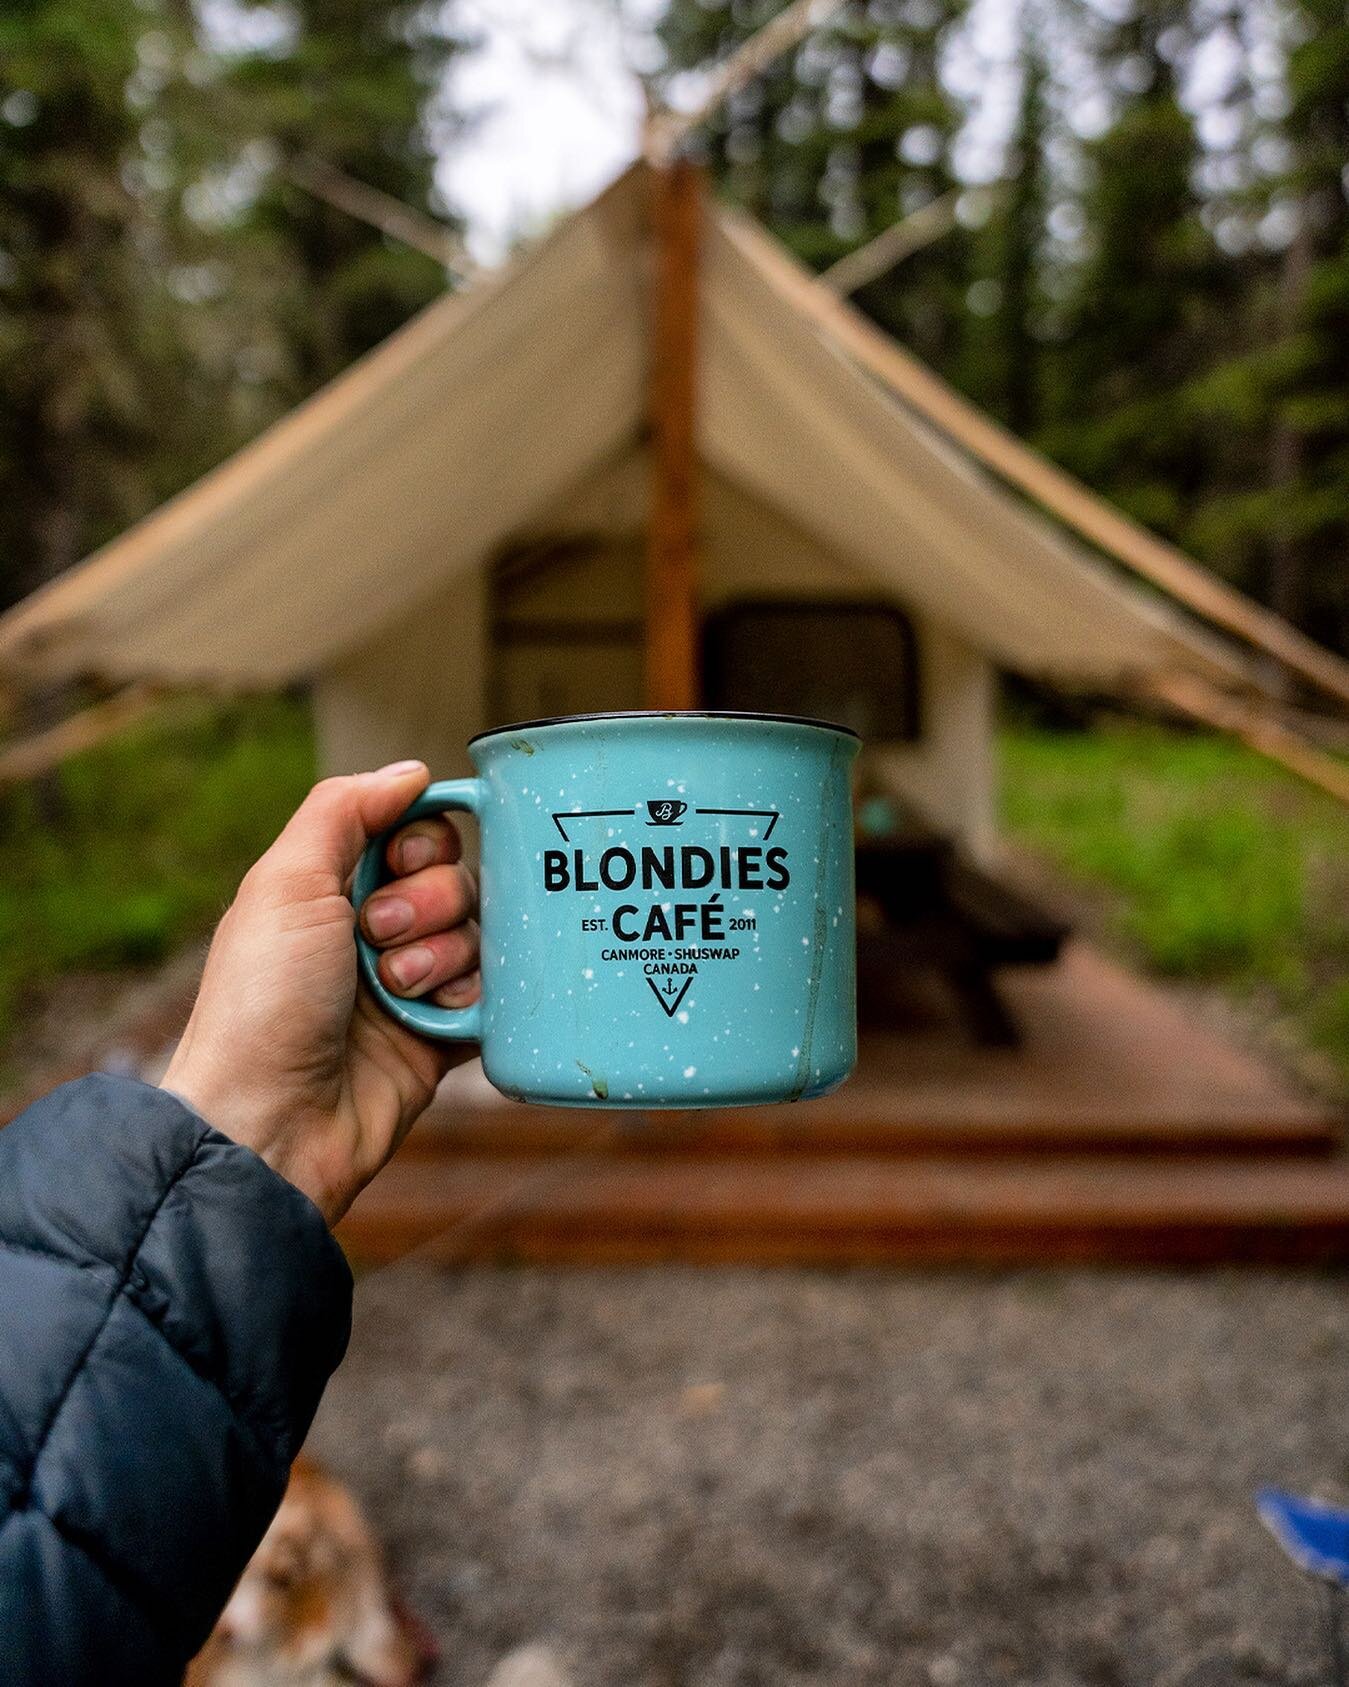 Warm days = more mornings like this in our future ⛺️☕️💛 Have you been out camping yet? #haveablondemoment